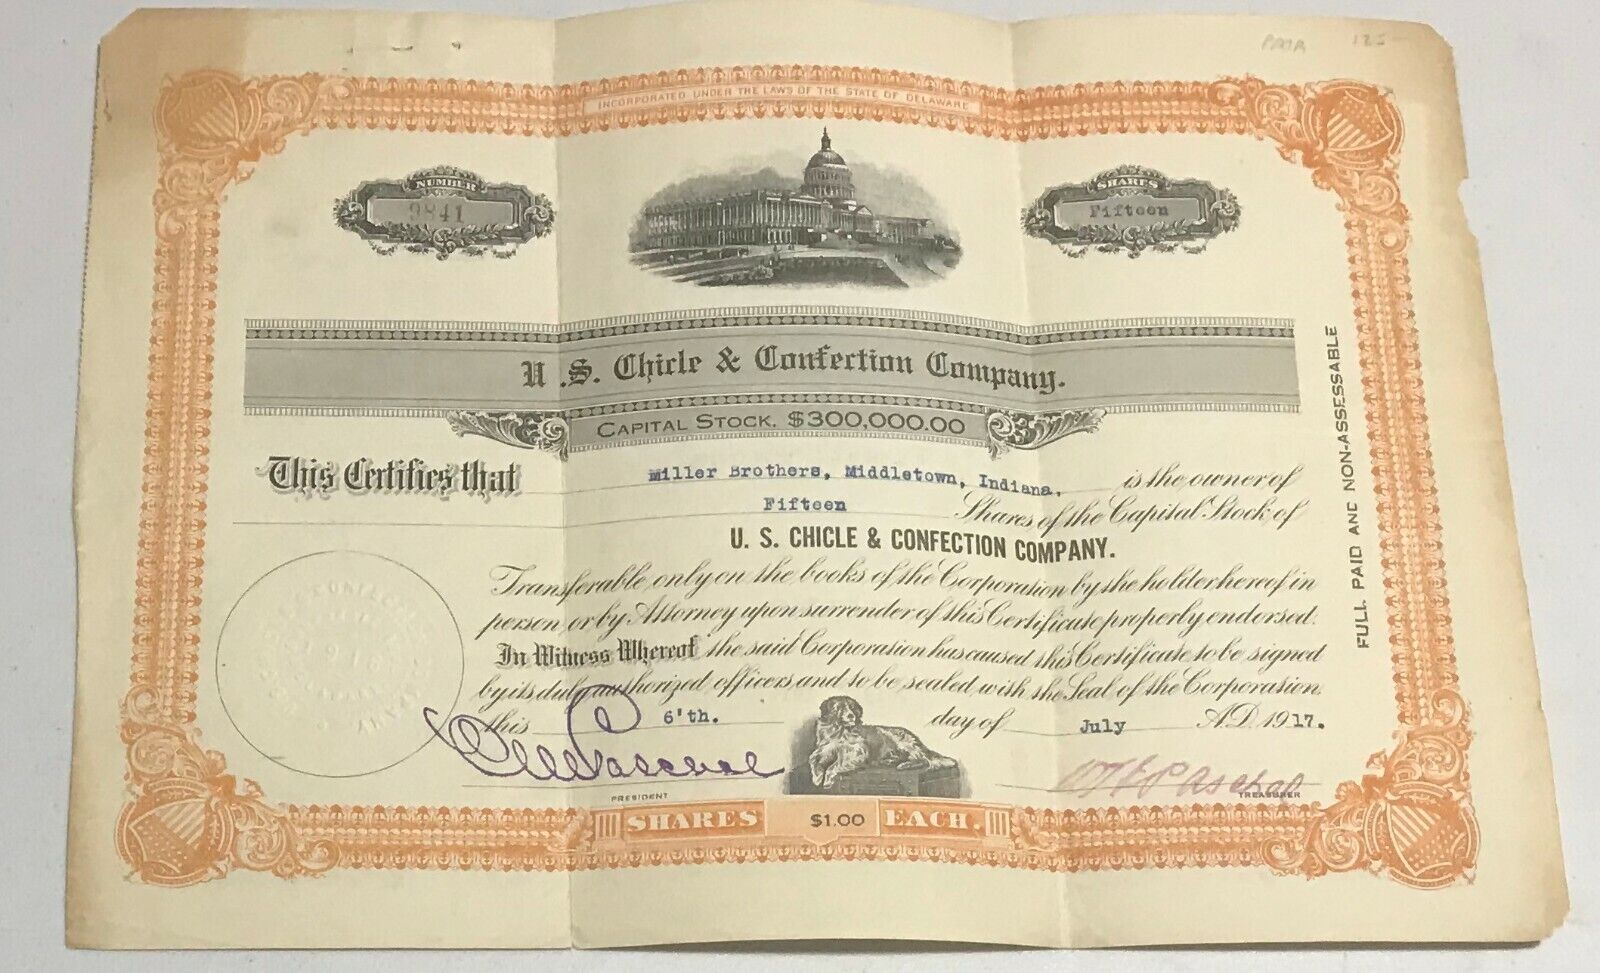 1917 U.s. Chicle & Confection Company Stock Certificate & Business Letter